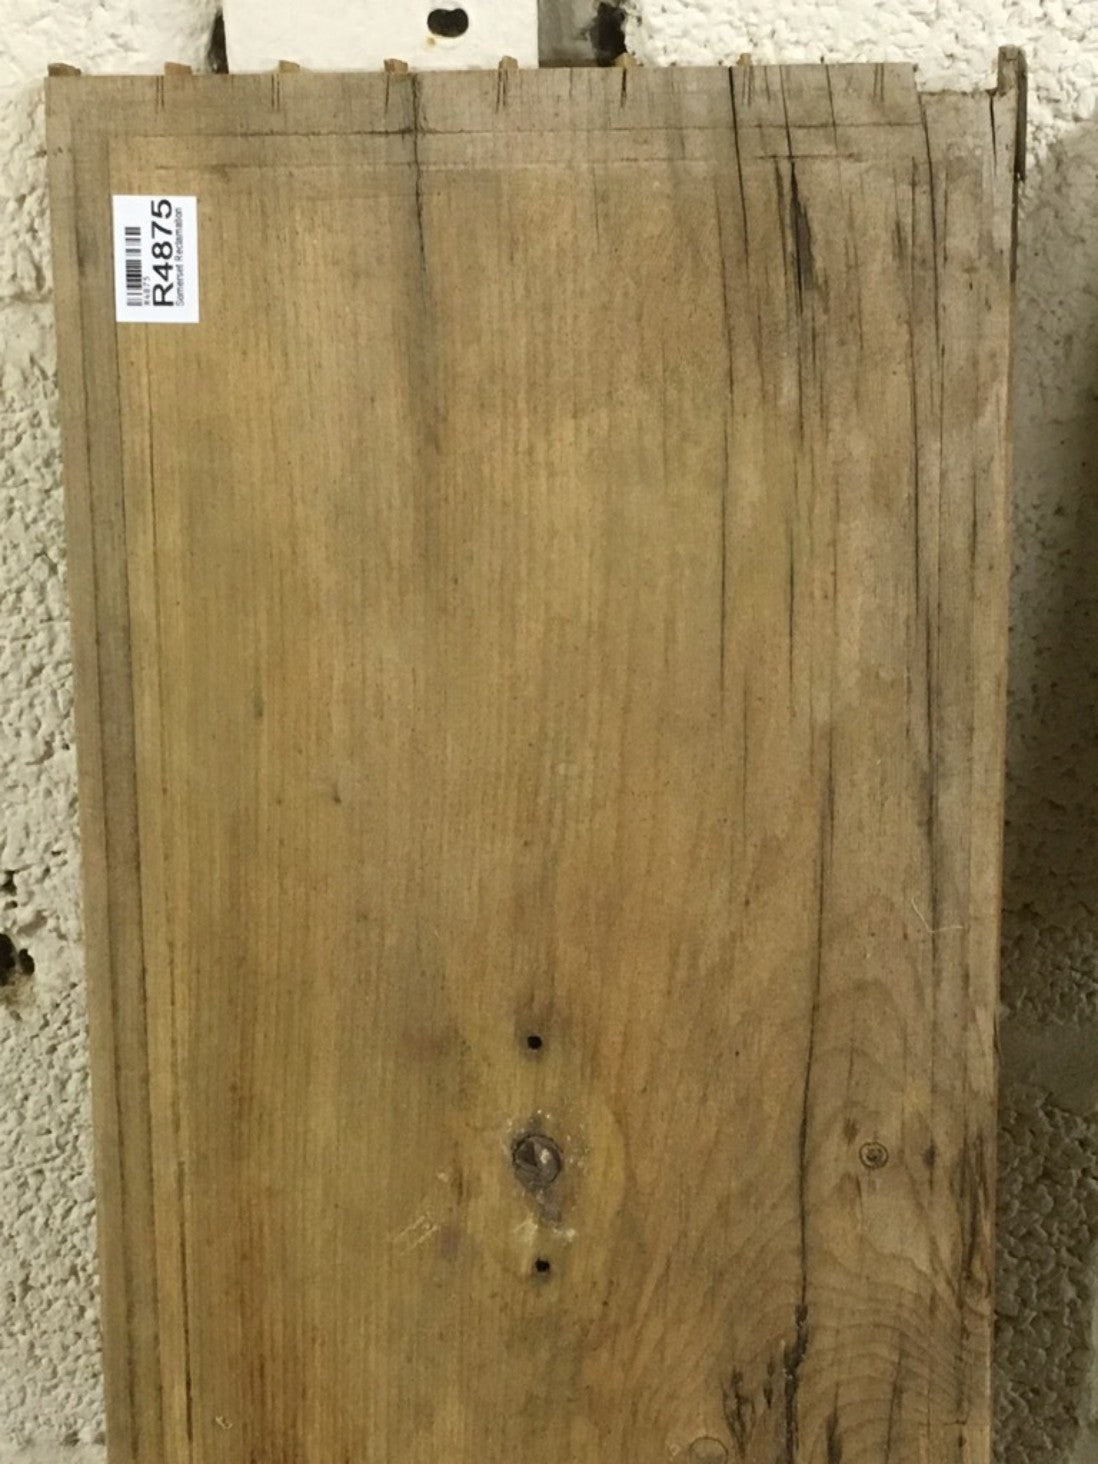 0.67m2 Old Pine Boards Drawer Fronts 130.5cm 51 3/8" Thick Timber Restoration